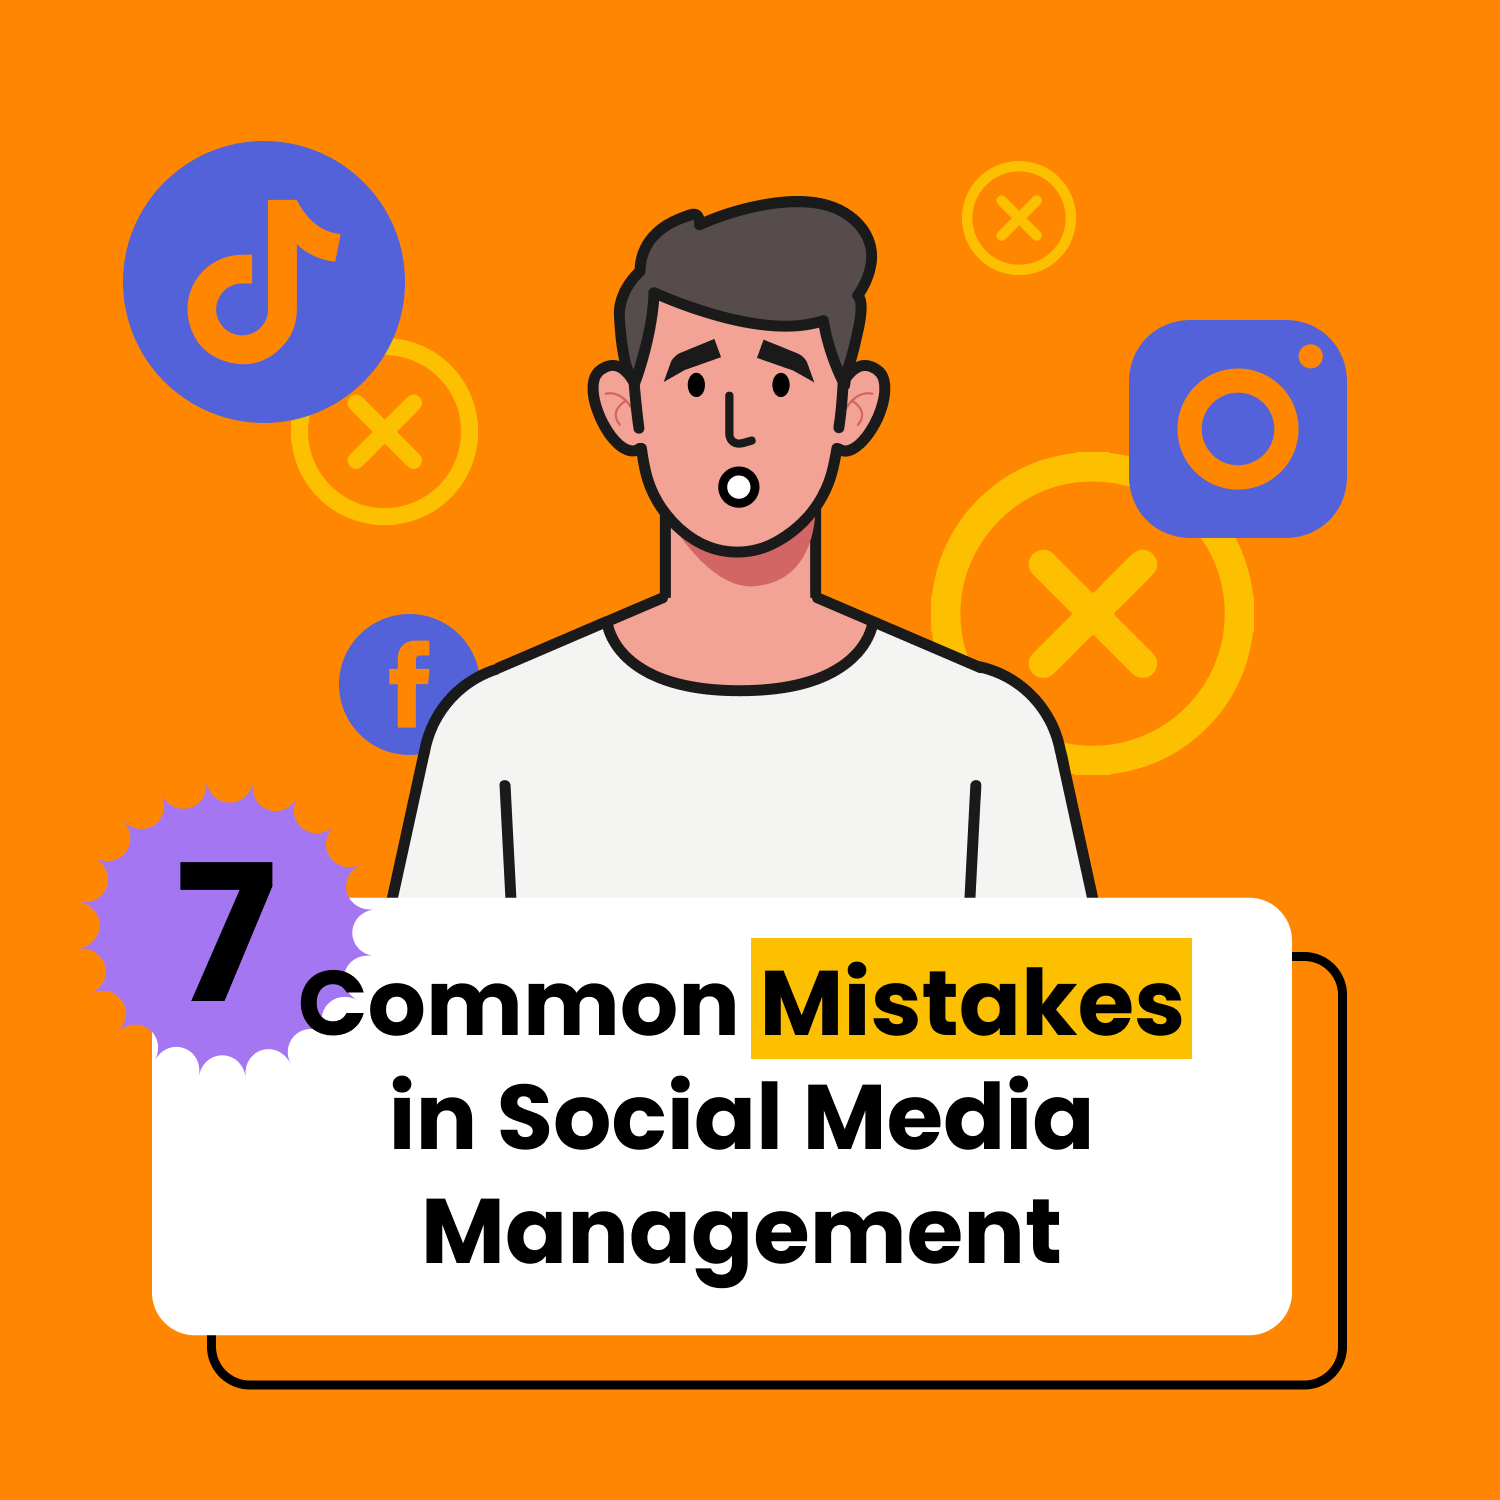 7 Common Mistakes in Social Media Management